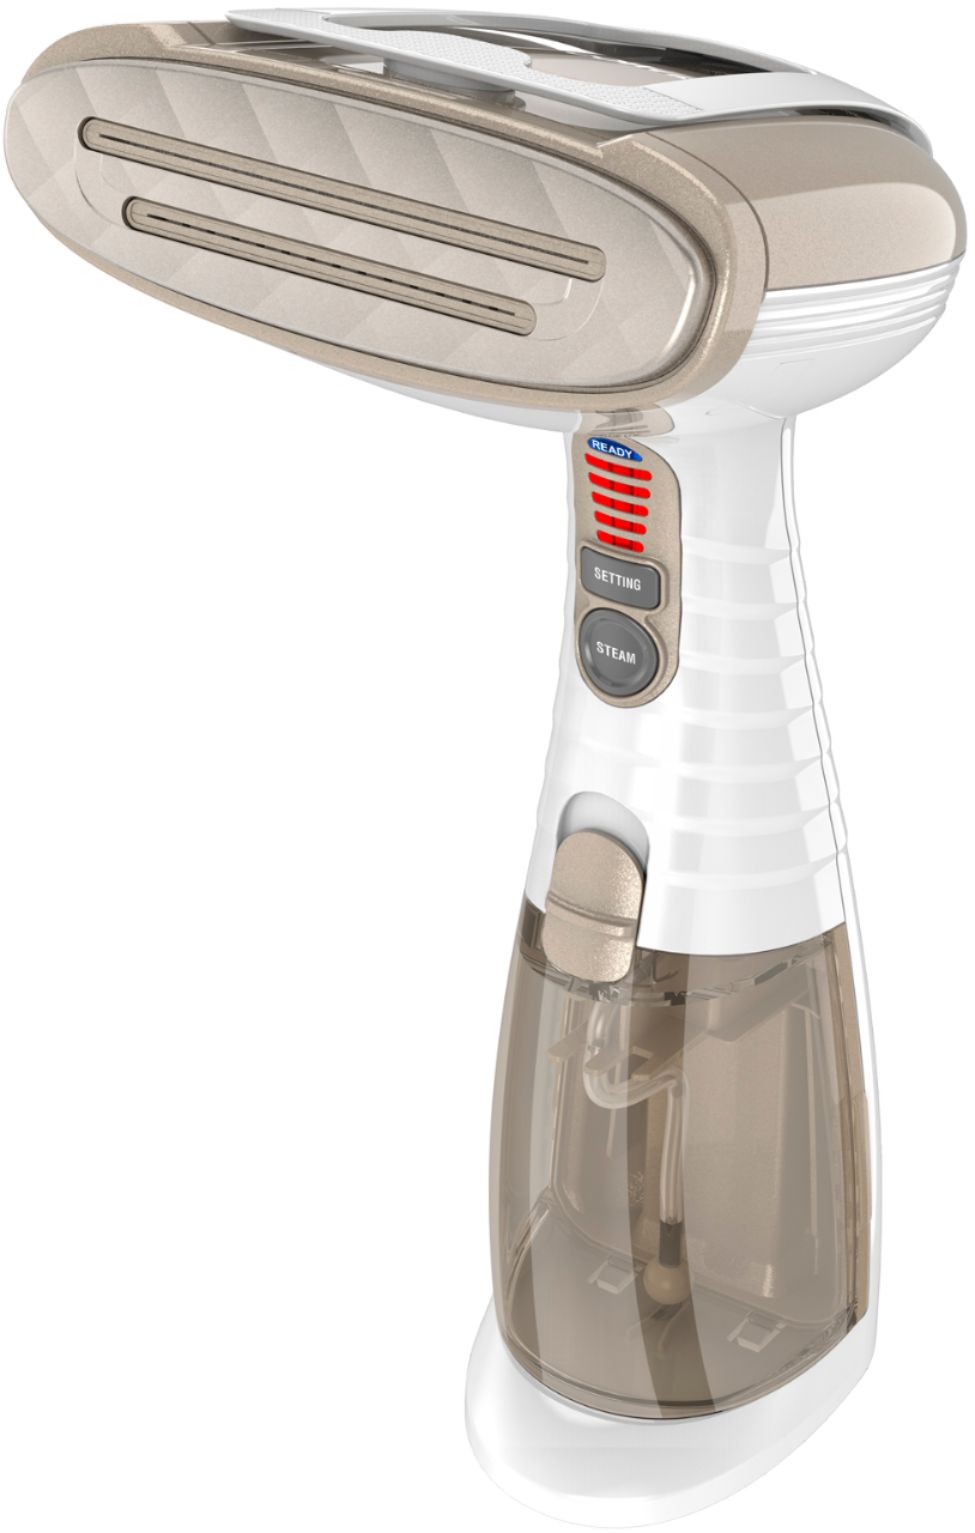 Left View: Conair - Turbo ExtremeSteam Handheld Fabric Steamer - Brown